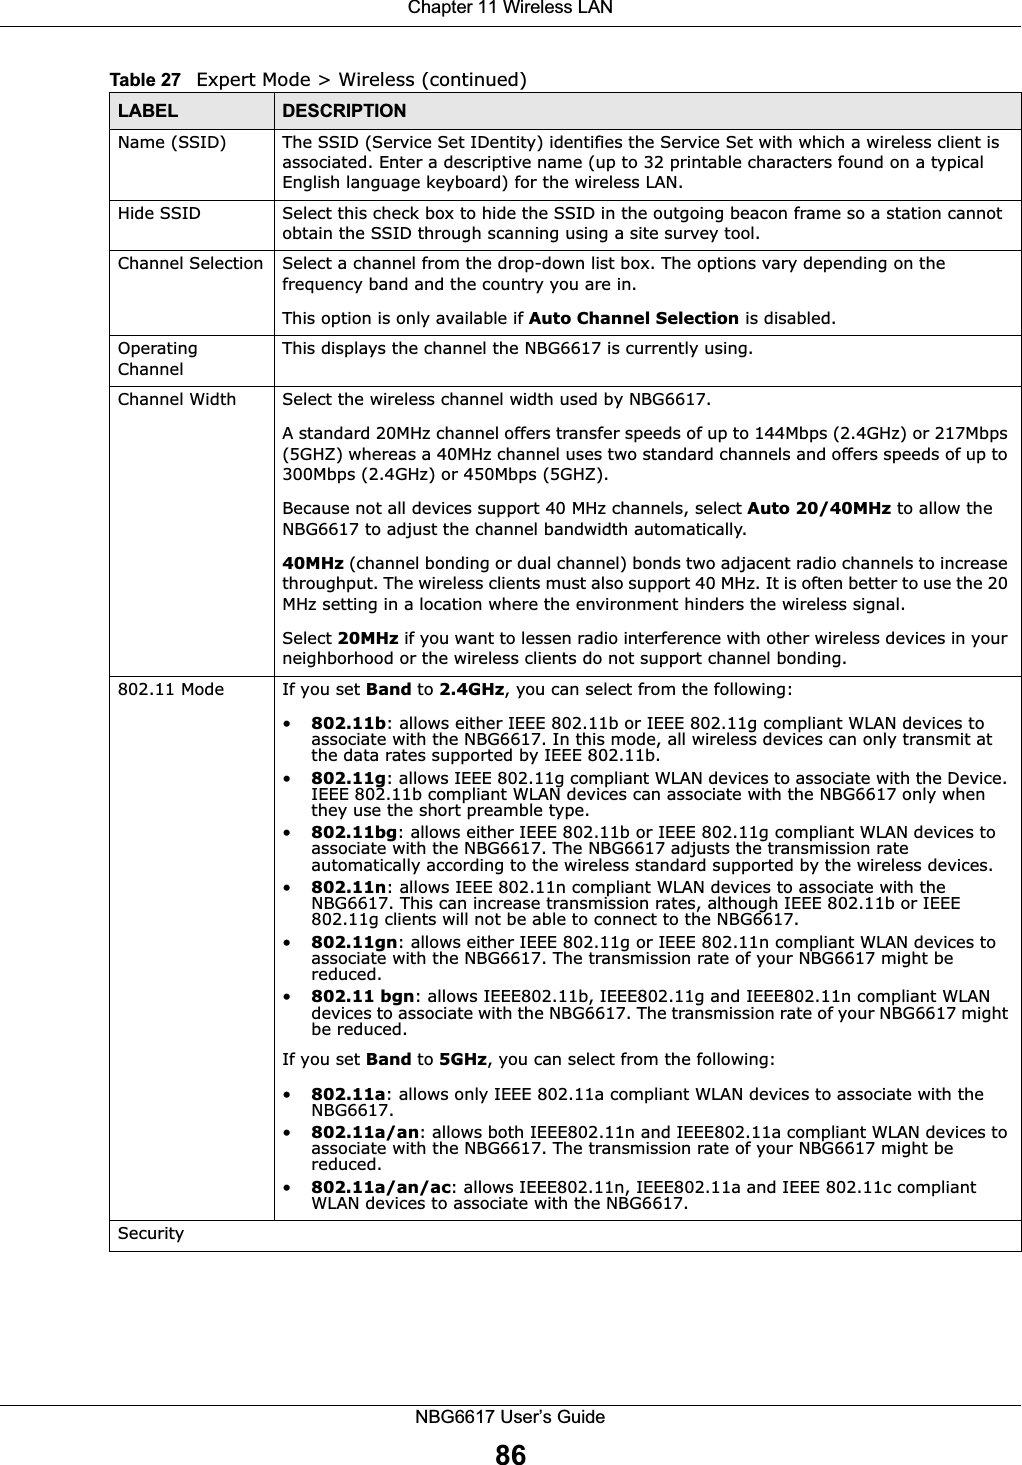 Chapter 11 Wireless LANNBG6617 User’s Guide86Name (SSID)  The SSID (Service Set IDentity) identifies the Service Set with which a wireless client is associated. Enter a descriptive name (up to 32 printable characters found on a typical English language keyboard) for the wireless LAN. Hide SSID Select this check box to hide the SSID in the outgoing beacon frame so a station cannot obtain the SSID through scanning using a site survey tool.Channel Selection Select a channel from the drop-down list box. The options vary depending on the frequency band and the country you are in.This option is only available if Auto Channel Selection is disabled.Operating Channel This displays the channel the NBG6617 is currently using.Channel Width Select the wireless channel width used by NBG6617.A standard 20MHz channel offers transfer speeds of up to 144Mbps (2.4GHz) or 217Mbps (5GHZ) whereas a 40MHz channel uses two standard channels and offers speeds of up to 300Mbps (2.4GHz) or 450Mbps (5GHZ). Because not all devices support 40 MHz channels, select Auto 20/40MHz to allow the NBG6617 to adjust the channel bandwidth automatically.40MHz (channel bonding or dual channel) bonds two adjacent radio channels to increase throughput. The wireless clients must also support 40 MHz. It is often better to use the 20 MHz setting in a location where the environment hinders the wireless signal. Select 20MHz if you want to lessen radio interference with other wireless devices in your neighborhood or the wireless clients do not support channel bonding.802.11 Mode If you set Band to 2.4GHz, you can select from the following:•802.11b: allows either IEEE 802.11b or IEEE 802.11g compliant WLAN devices to associate with the NBG6617. In this mode, all wireless devices can only transmit at the data rates supported by IEEE 802.11b.•802.11g: allows IEEE 802.11g compliant WLAN devices to associate with the Device. IEEE 802.11b compliant WLAN devices can associate with the NBG6617 only when they use the short preamble type.•802.11bg: allows either IEEE 802.11b or IEEE 802.11g compliant WLAN devices to associate with the NBG6617. The NBG6617 adjusts the transmission rate automatically according to the wireless standard supported by the wireless devices.•802.11n: allows IEEE 802.11n compliant WLAN devices to associate with the NBG6617. This can increase transmission rates, although IEEE 802.11b or IEEE 802.11g clients will not be able to connect to the NBG6617. •802.11gn: allows either IEEE 802.11g or IEEE 802.11n compliant WLAN devices to associate with the NBG6617. The transmission rate of your NBG6617 might be reduced.•802.11 bgn: allows IEEE802.11b, IEEE802.11g and IEEE802.11n compliant WLAN devices to associate with the NBG6617. The transmission rate of your NBG6617 might be reduced.If you set Band to 5GHz, you can select from the following:•802.11a: allows only IEEE 802.11a compliant WLAN devices to associate with the NBG6617.•802.11a/an: allows both IEEE802.11n and IEEE802.11a compliant WLAN devices to associate with the NBG6617. The transmission rate of your NBG6617 might be reduced.•802.11a/an/ac: allows IEEE802.11n, IEEE802.11a and IEEE 802.11c compliant WLAN devices to associate with the NBG6617.Security Table 27   Expert Mode &gt; Wireless (continued) LABEL DESCRIPTION